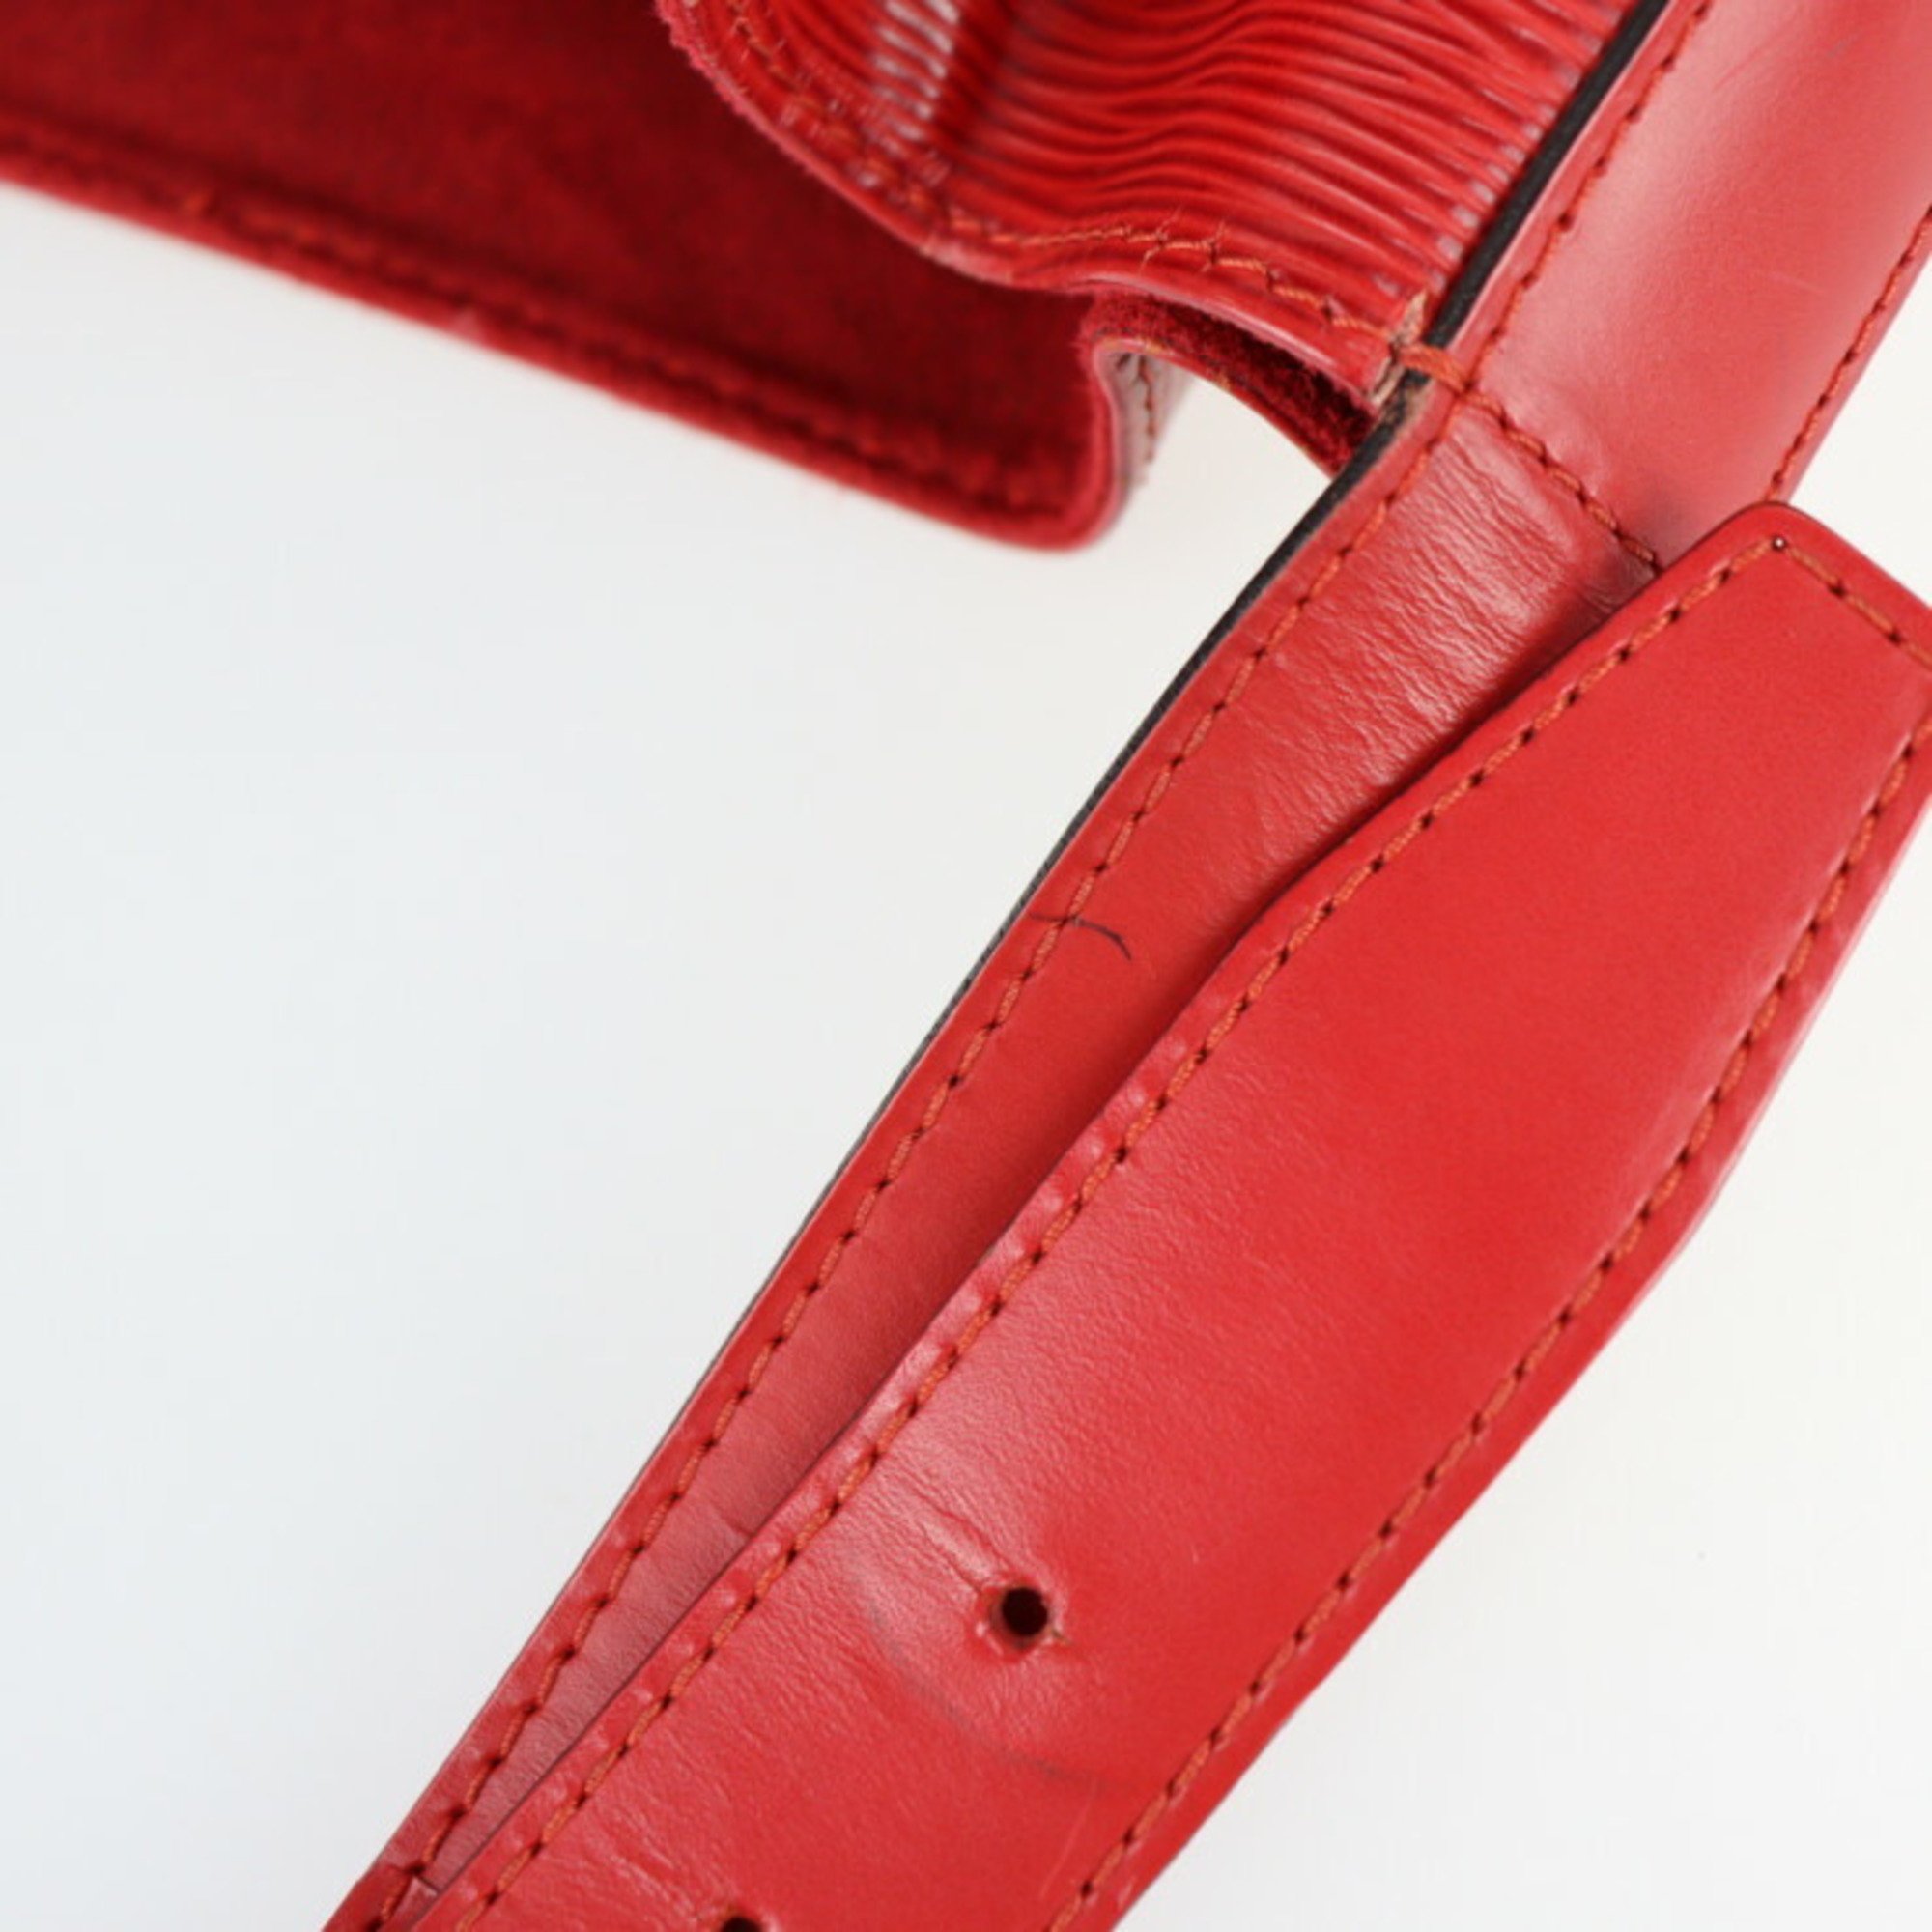 079 Pre-Owned Authentic Louis Vuitton Red Epi Leather